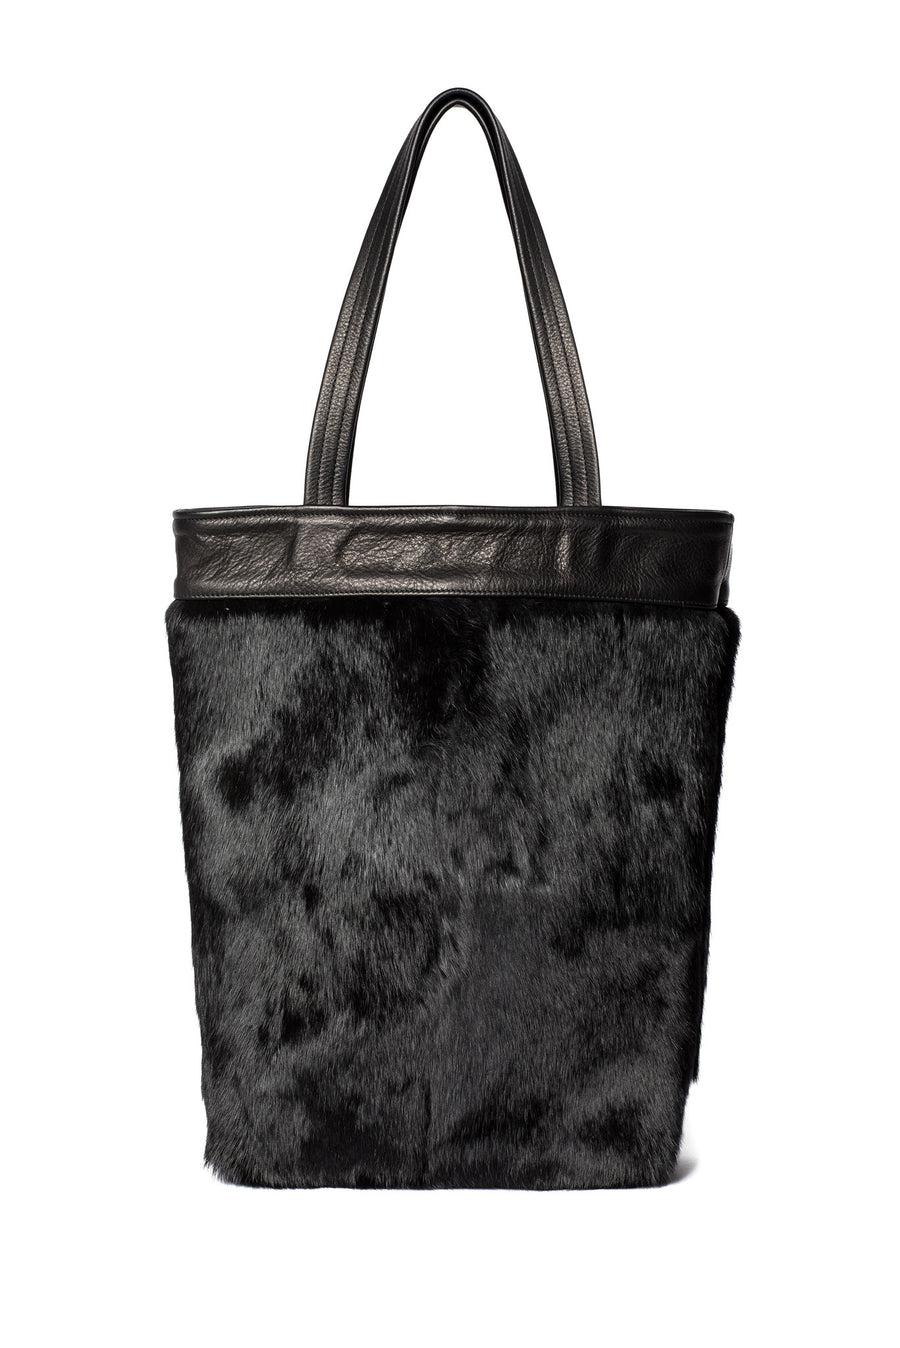 One-of-a-Kind Black Rabbit Fur Tote Black Leather Wendy Nichol Luxury Handbag Purse Bag Designer handmade in NYC New York City one of a kind Durable Handle strap Interior Pocket High Quality Leather